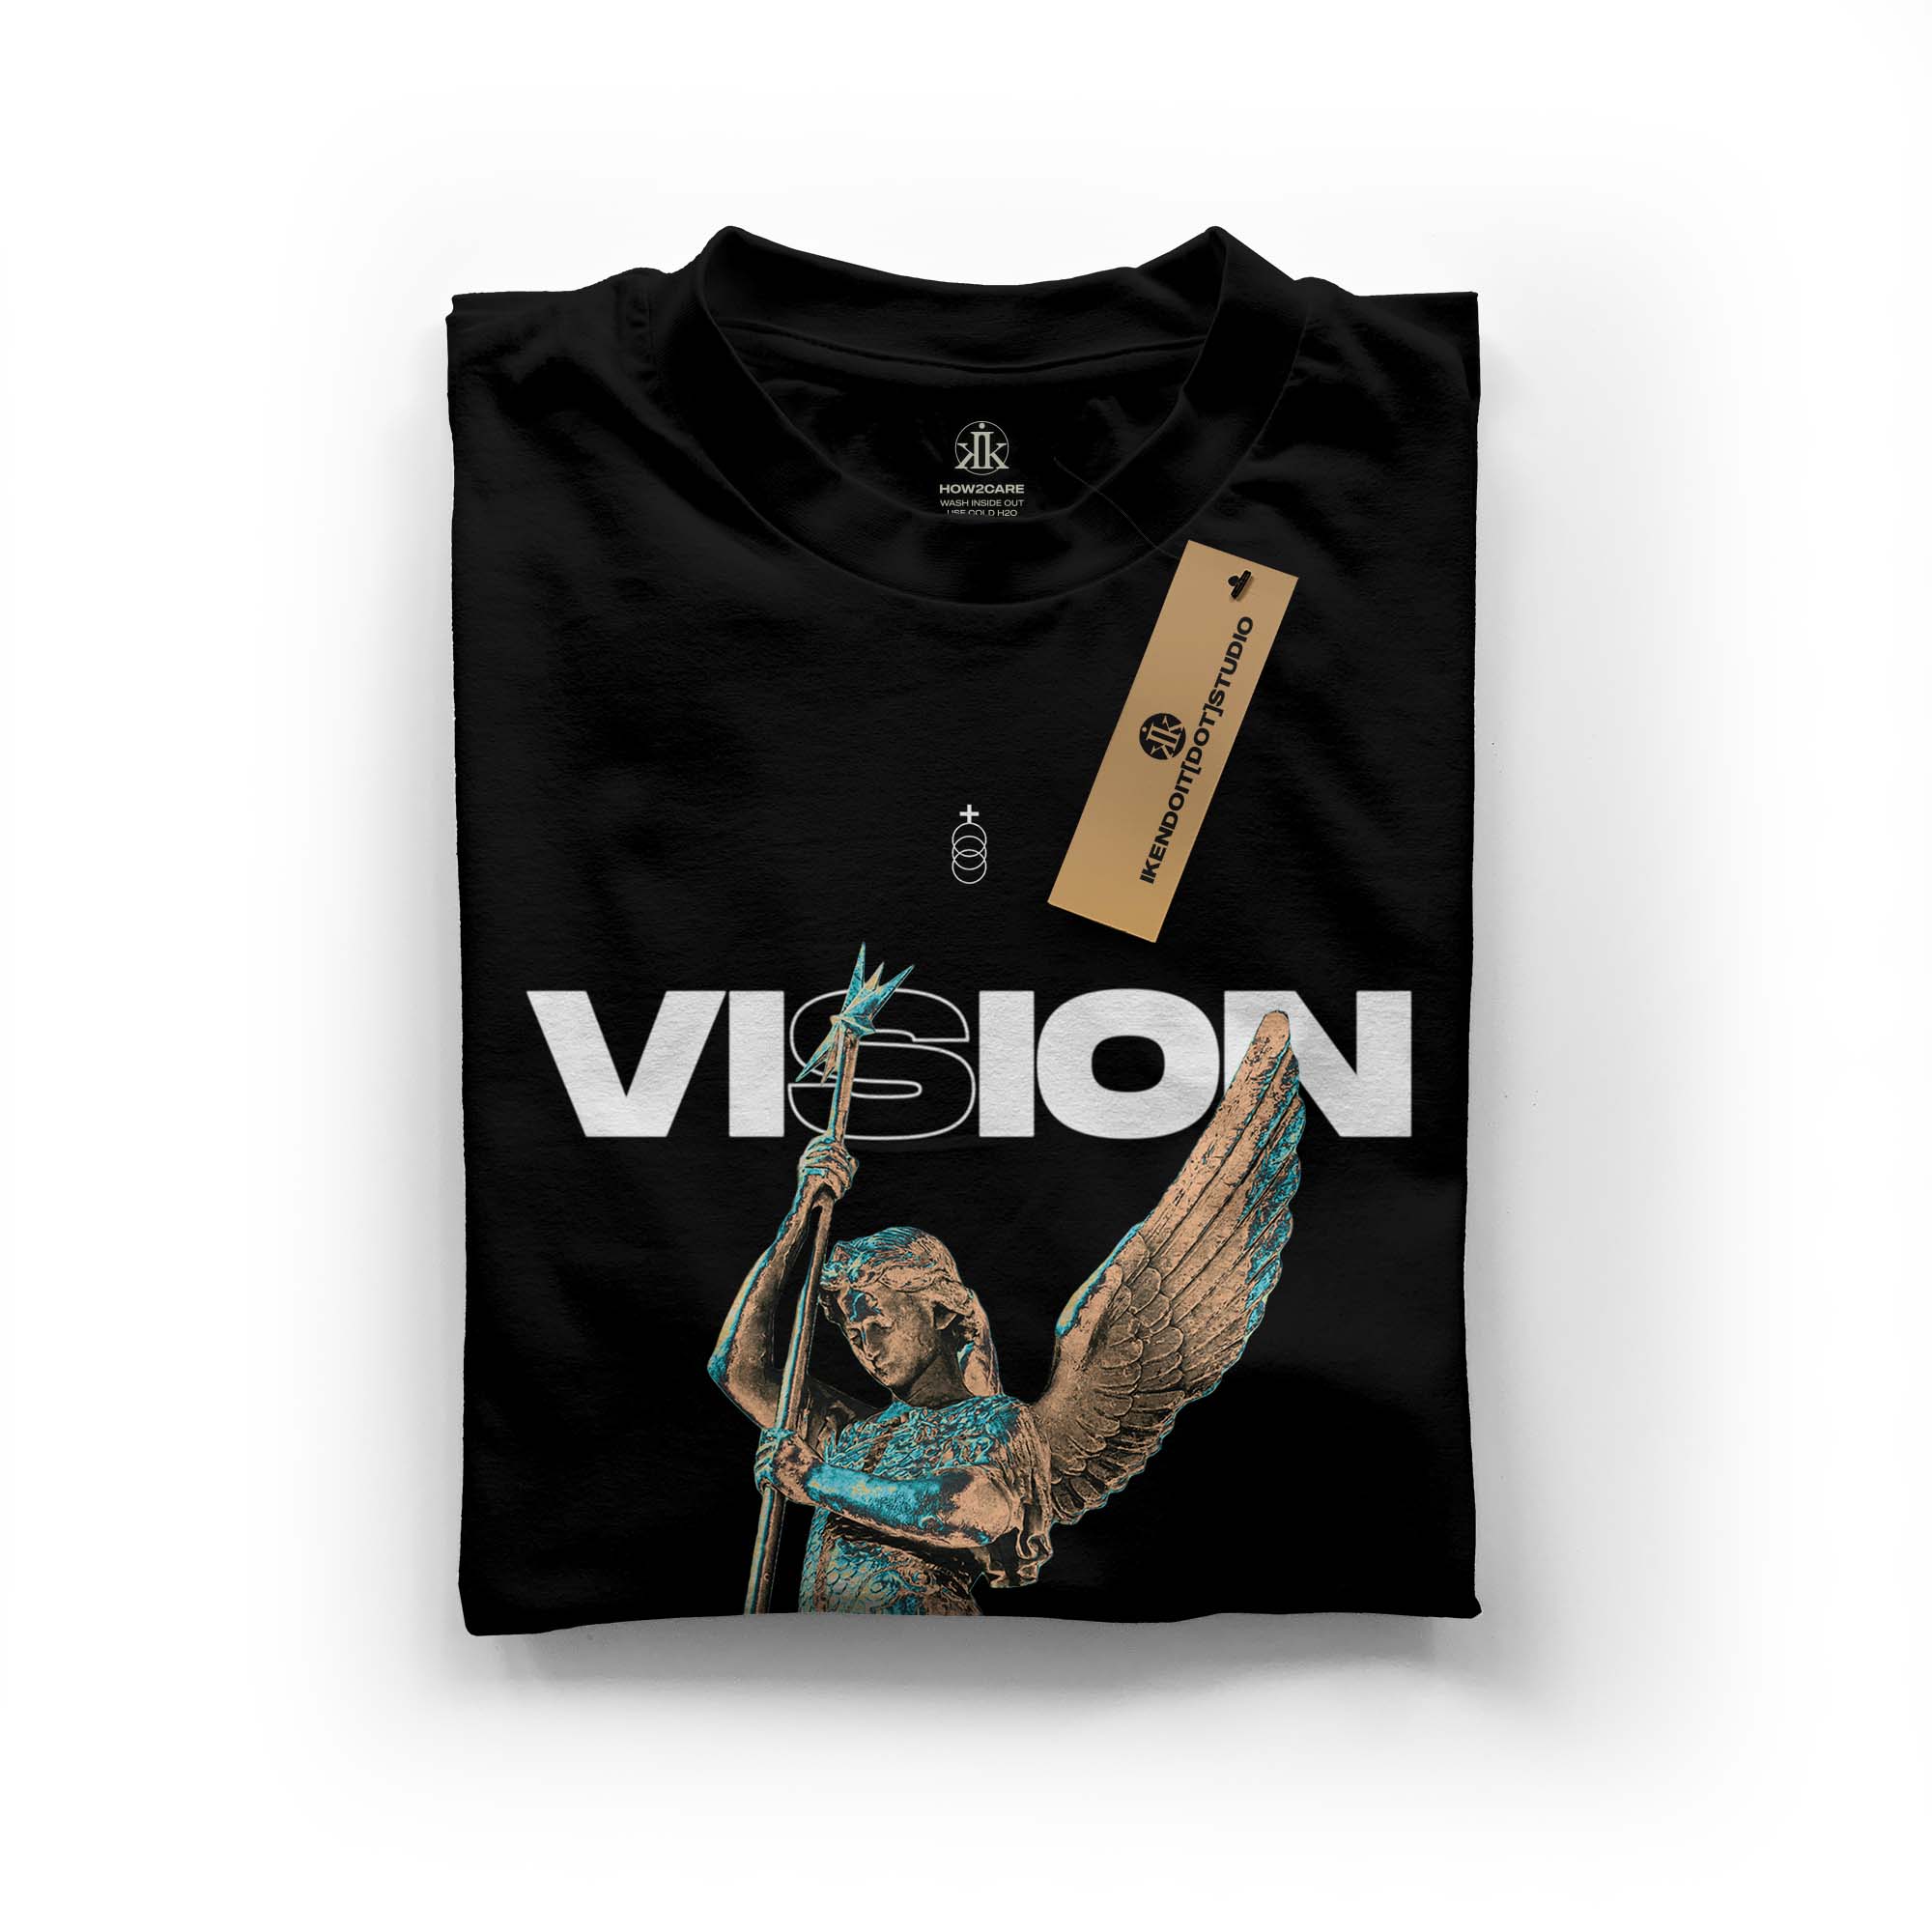 Fragmented Statue [Vision] Tee / Black